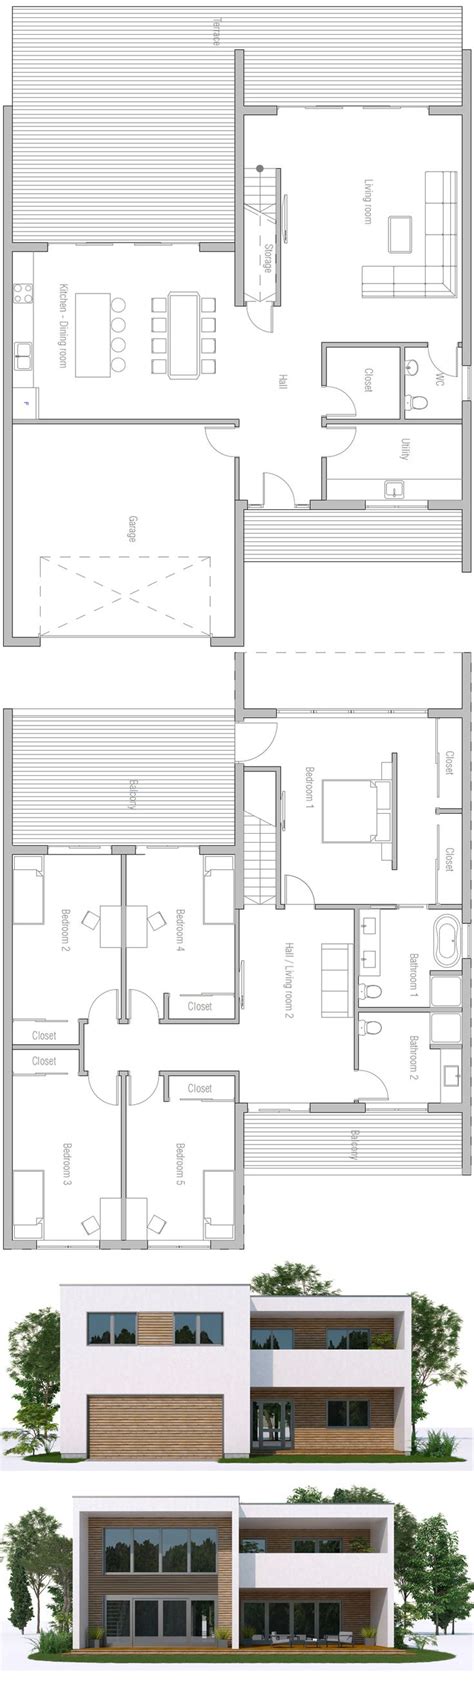 images  floor plans  pinterest house drawing house design  small home plans